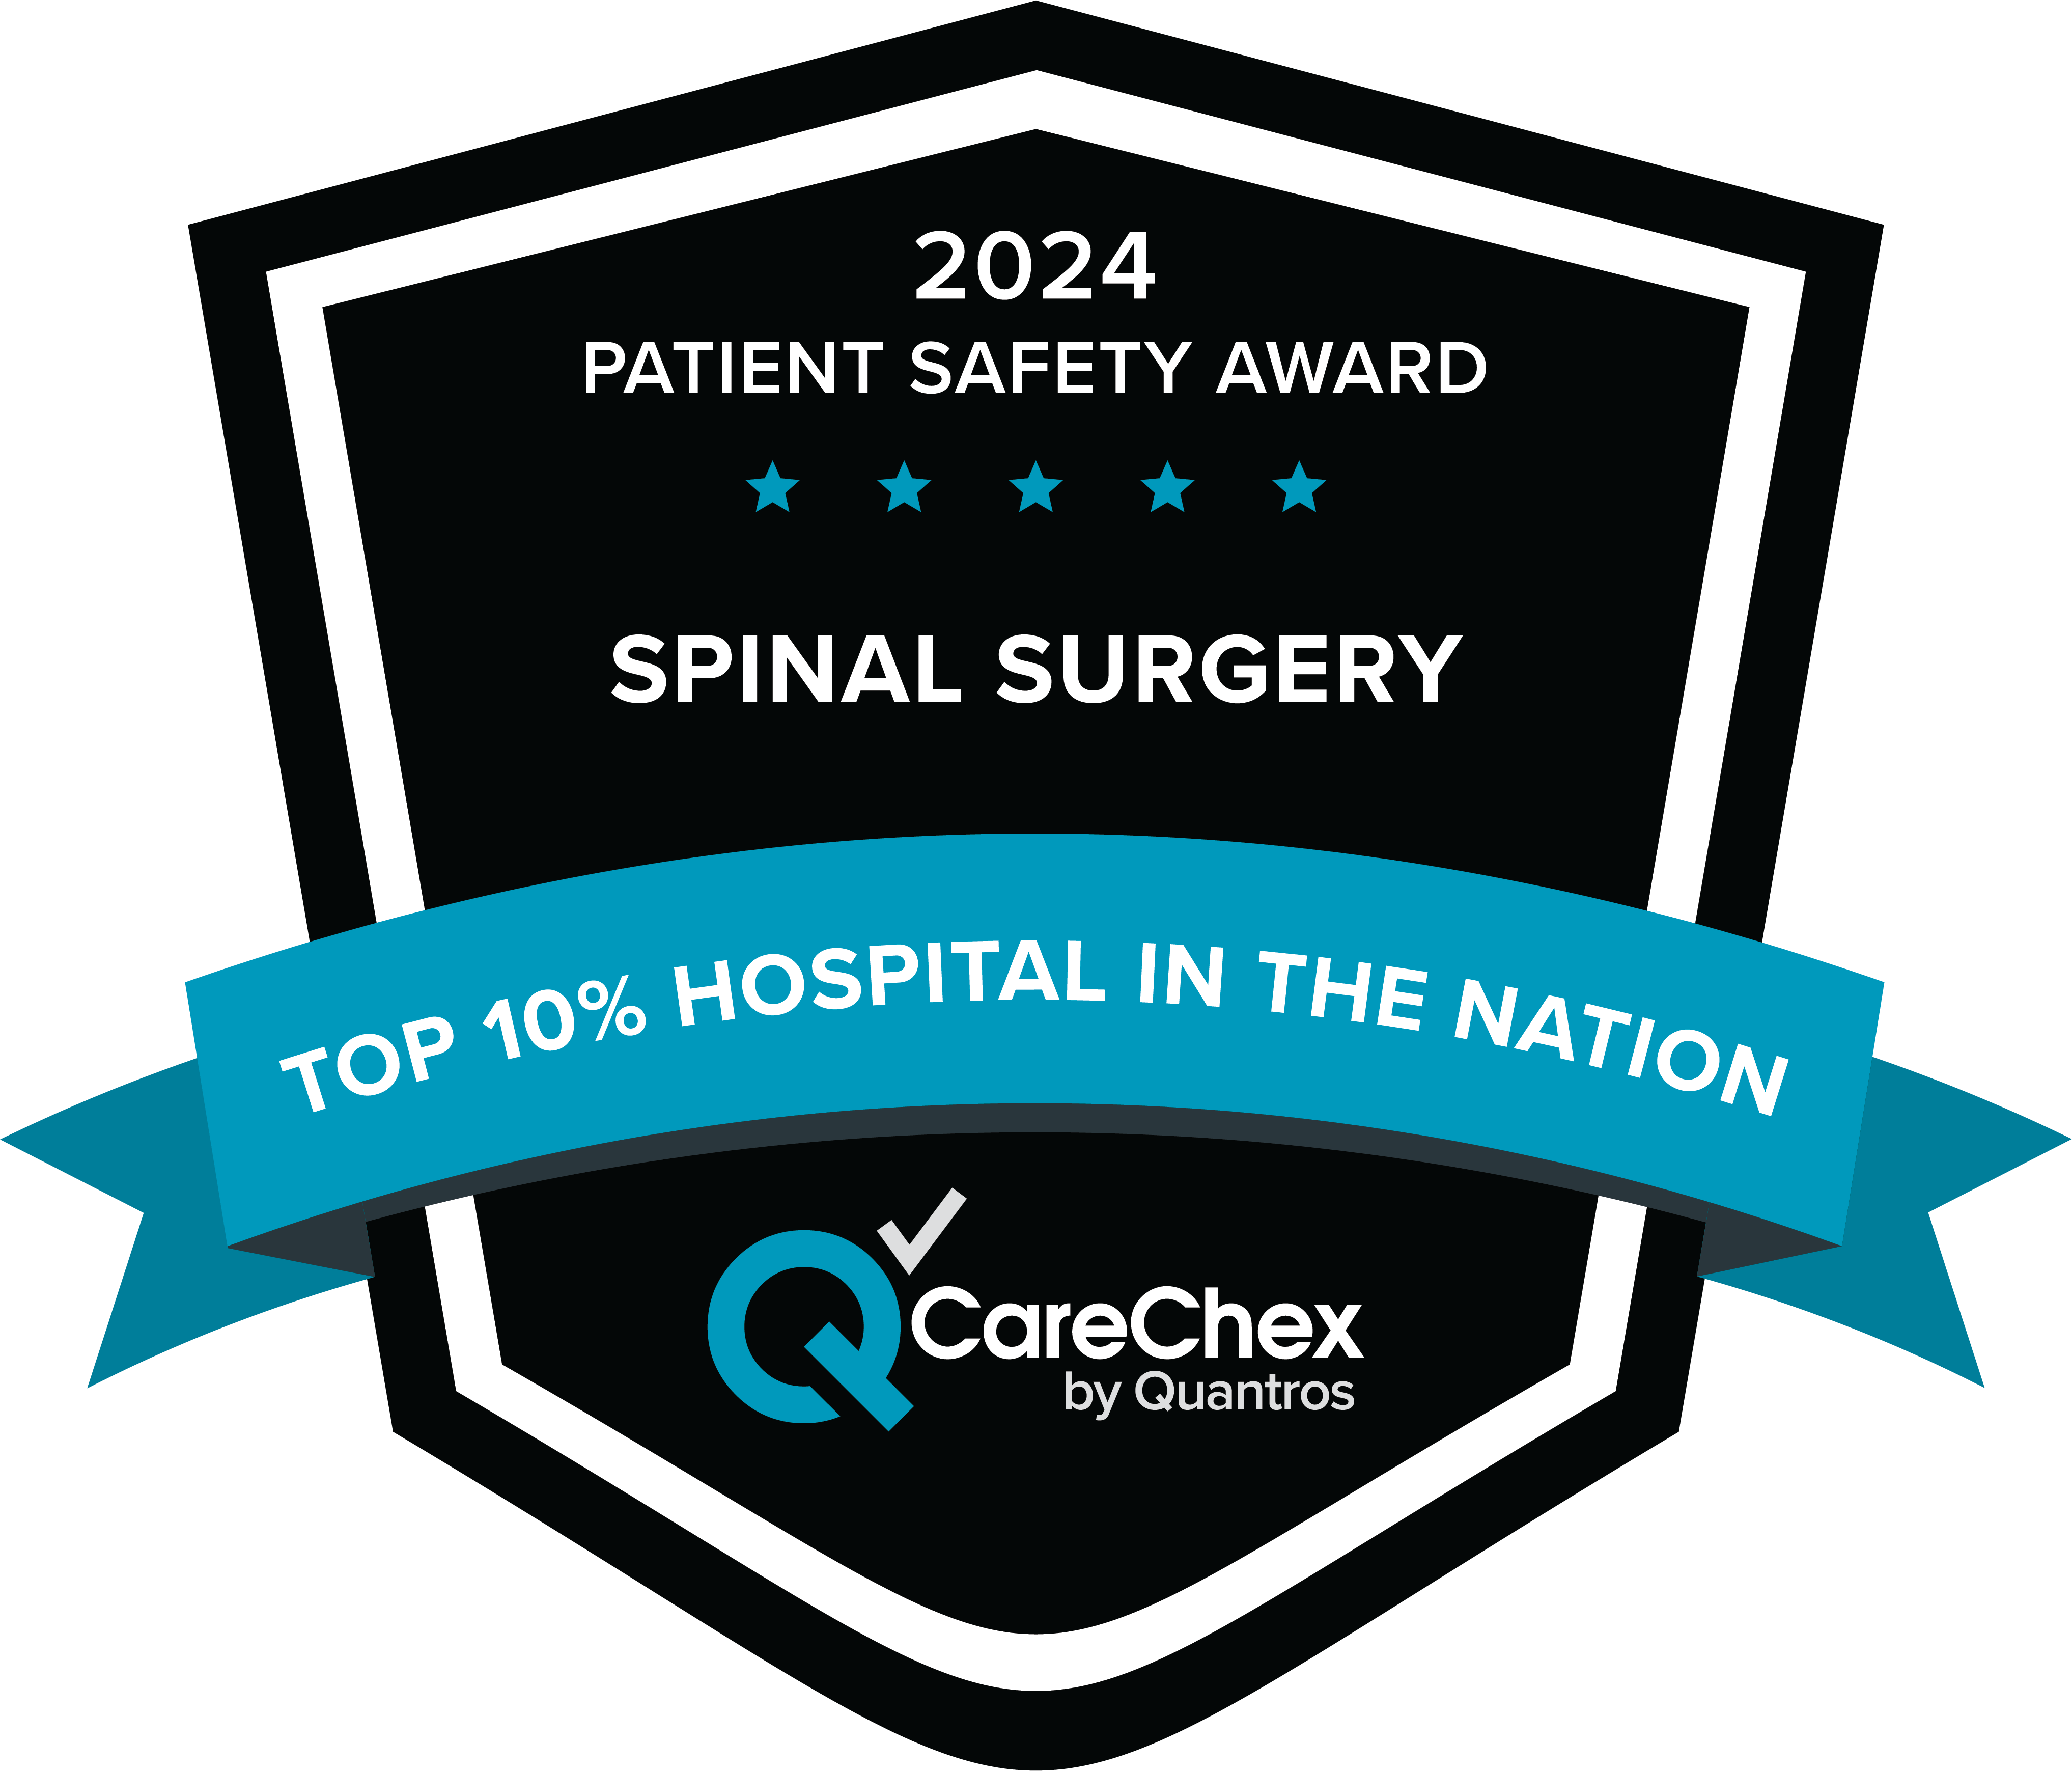 2024 CareChex Patient Safety Award Orthopedic Care Top 10% Hospital in the Nation award logo